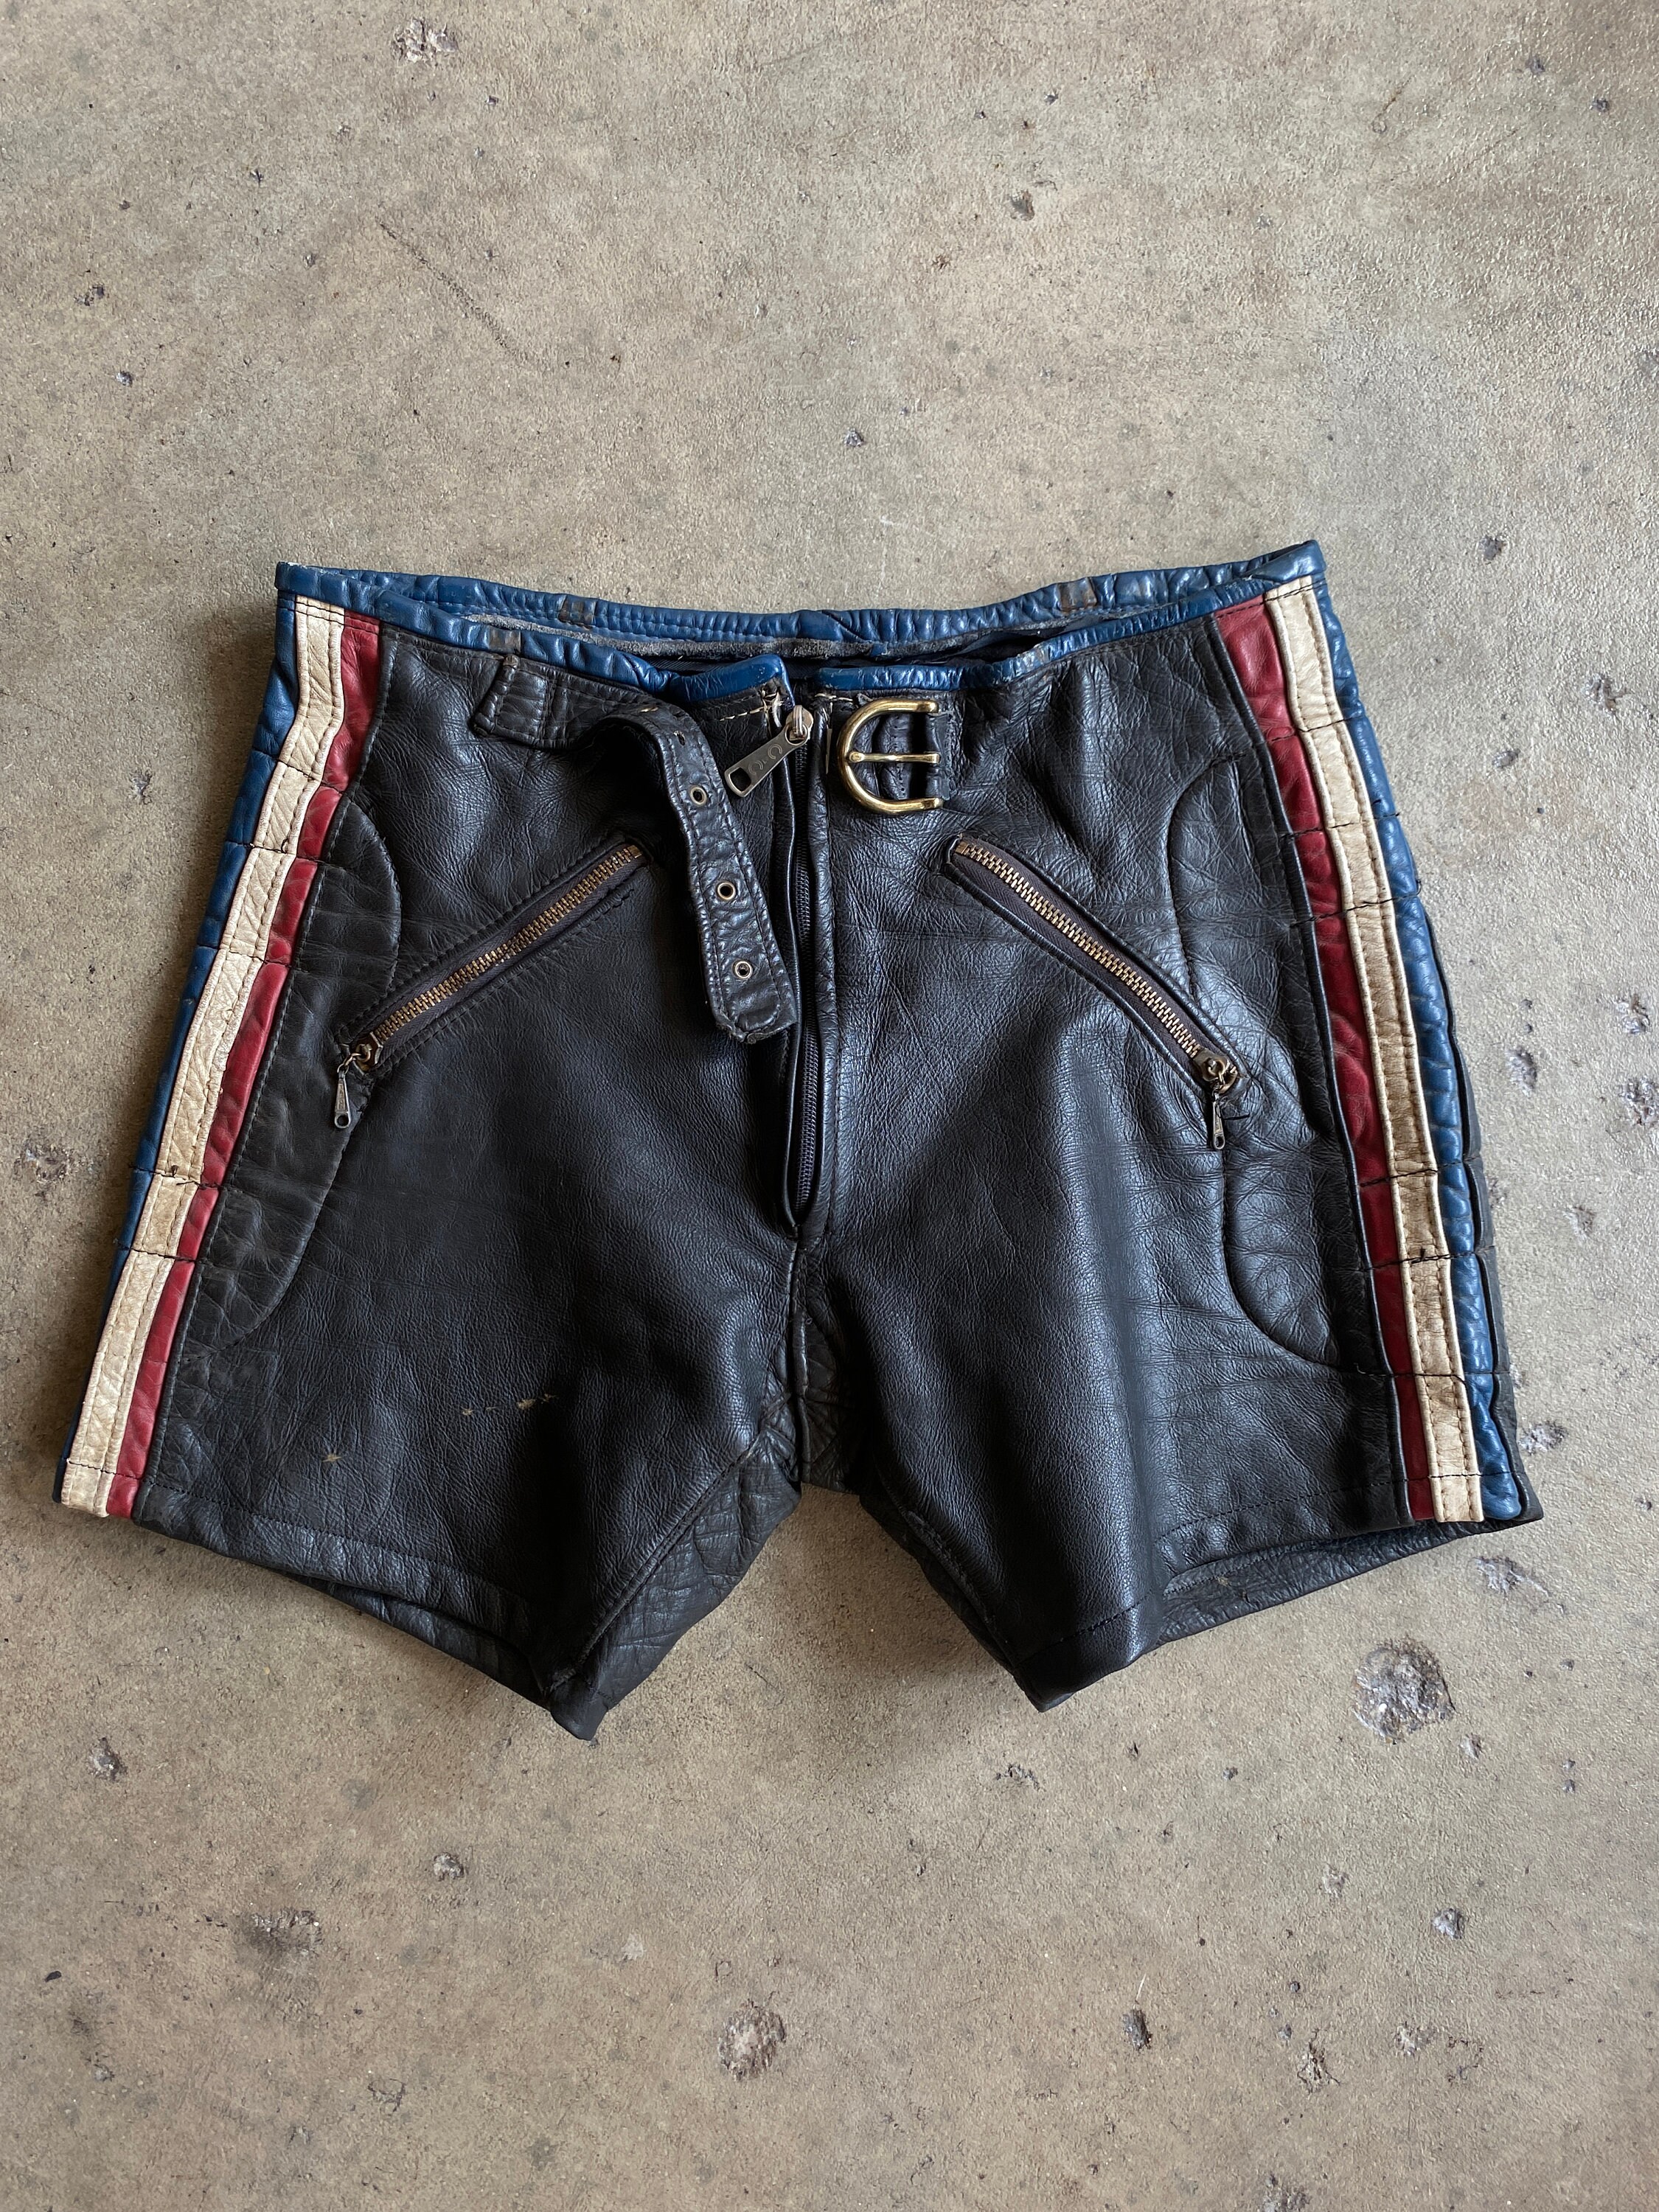 90s silver leather short shorts 6-8, vintage 1990s hot pants, go go shorts,  club kid rave headstock gender neutral 28 mens womens